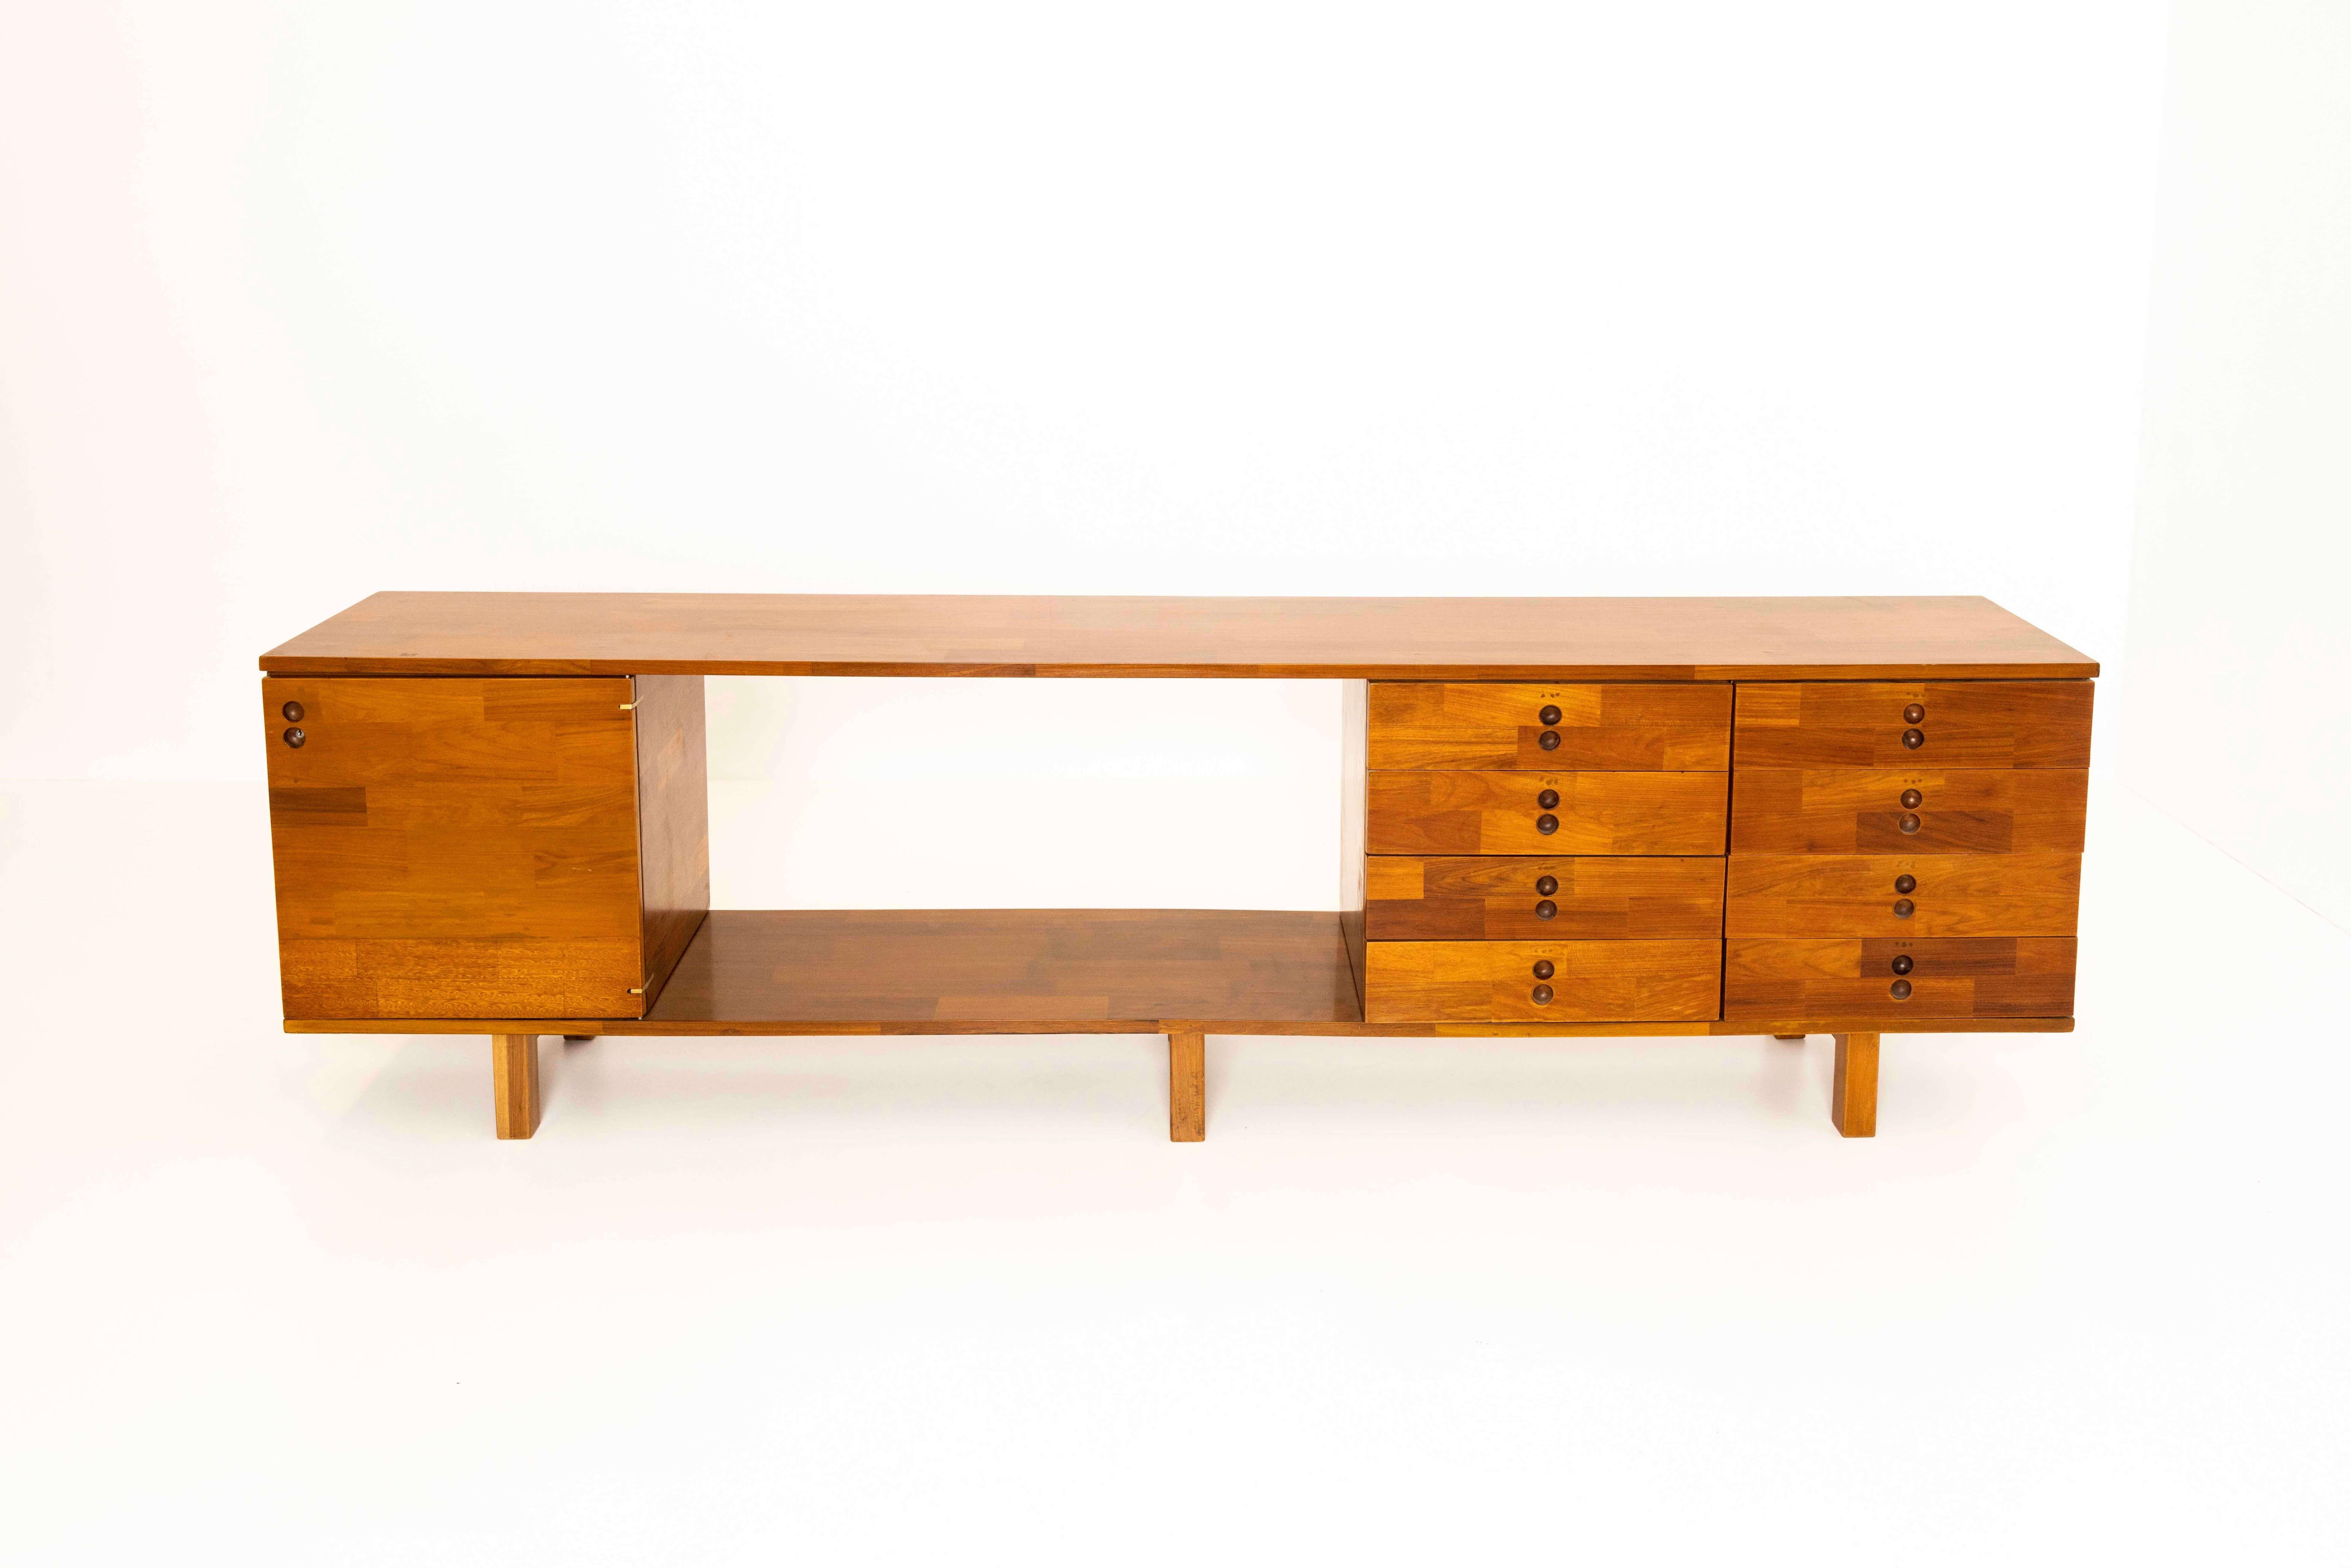 Sideboard by Jorge Zalszupin from his series of 'Modular Pieces' (Modulados Compiníveis) for L'Atelier. This sideboard in imbuia wood (walnut) is designed in Brazil around 1960. It has a finish in 'blocks of wood'. As both the back and the front are